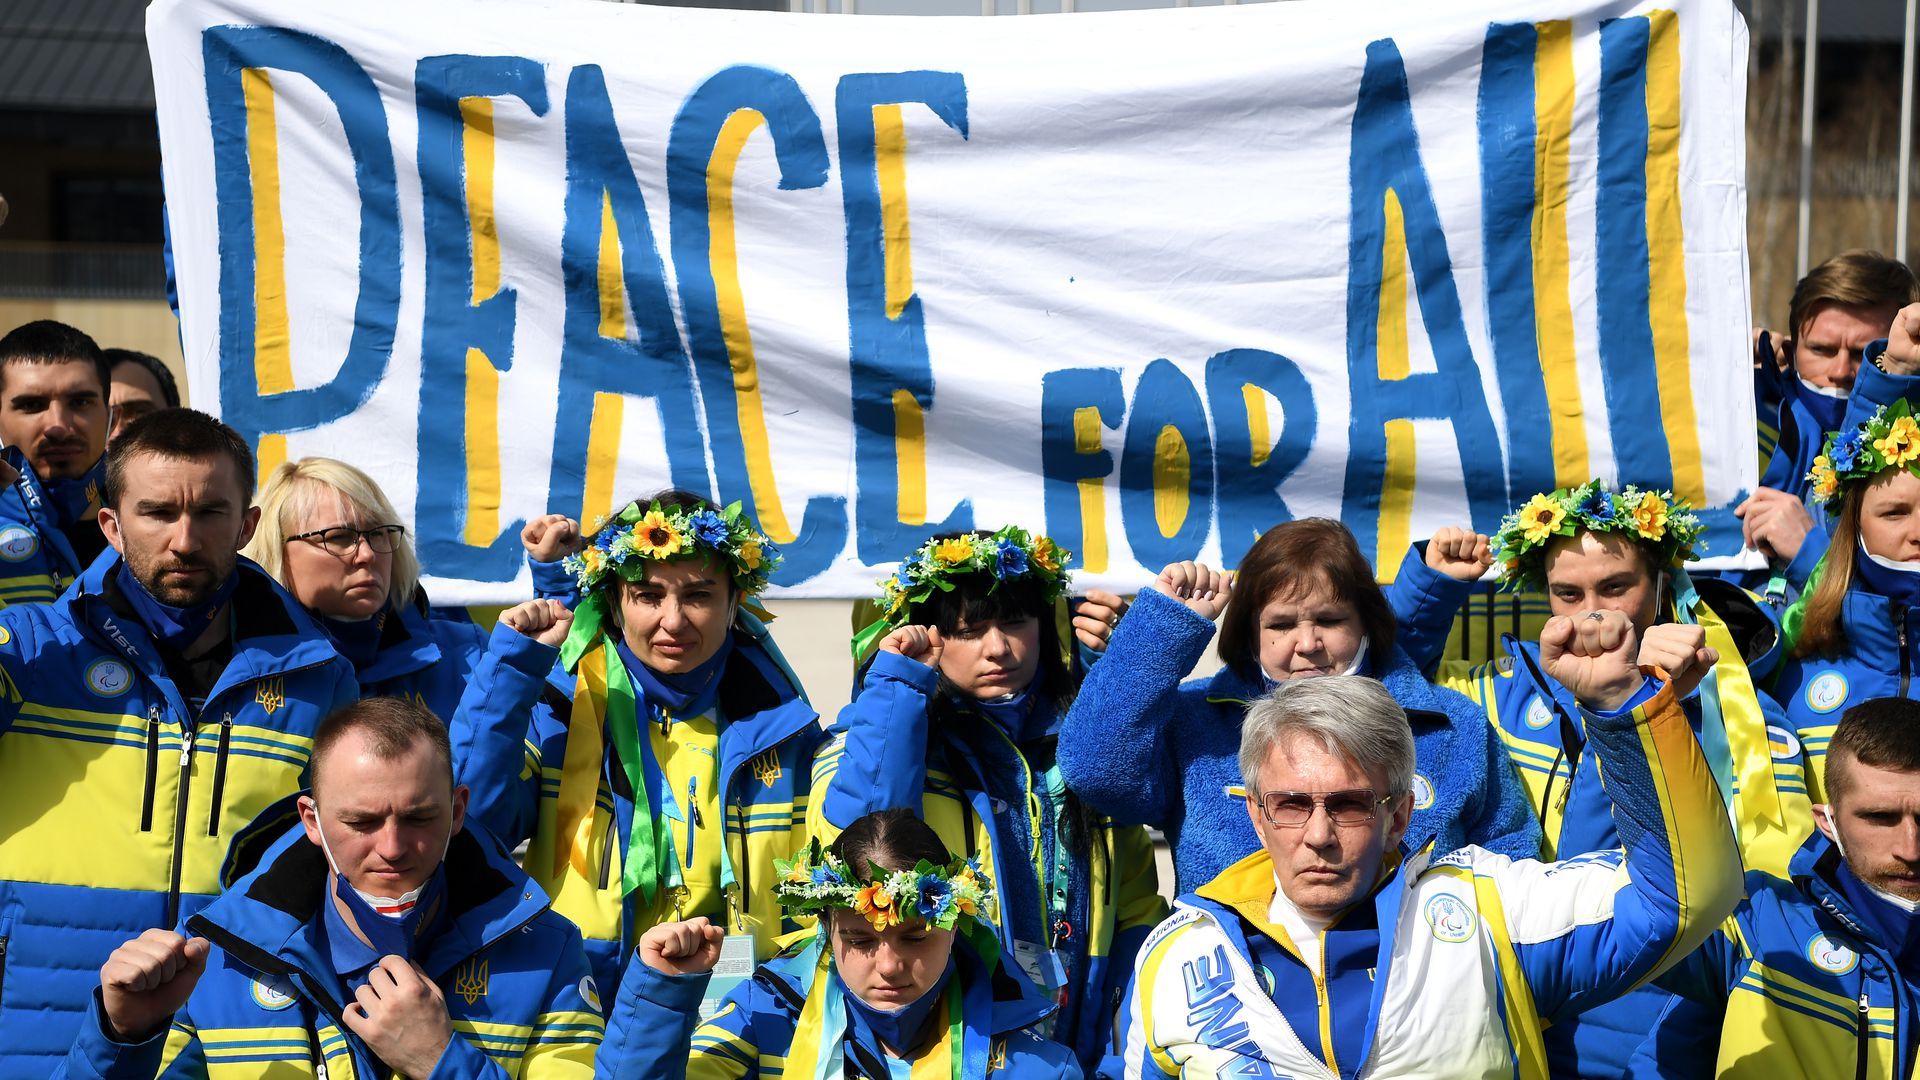 Ukraine's Paralympic Team holds up a "Peace For All" banner in the athletes' village.